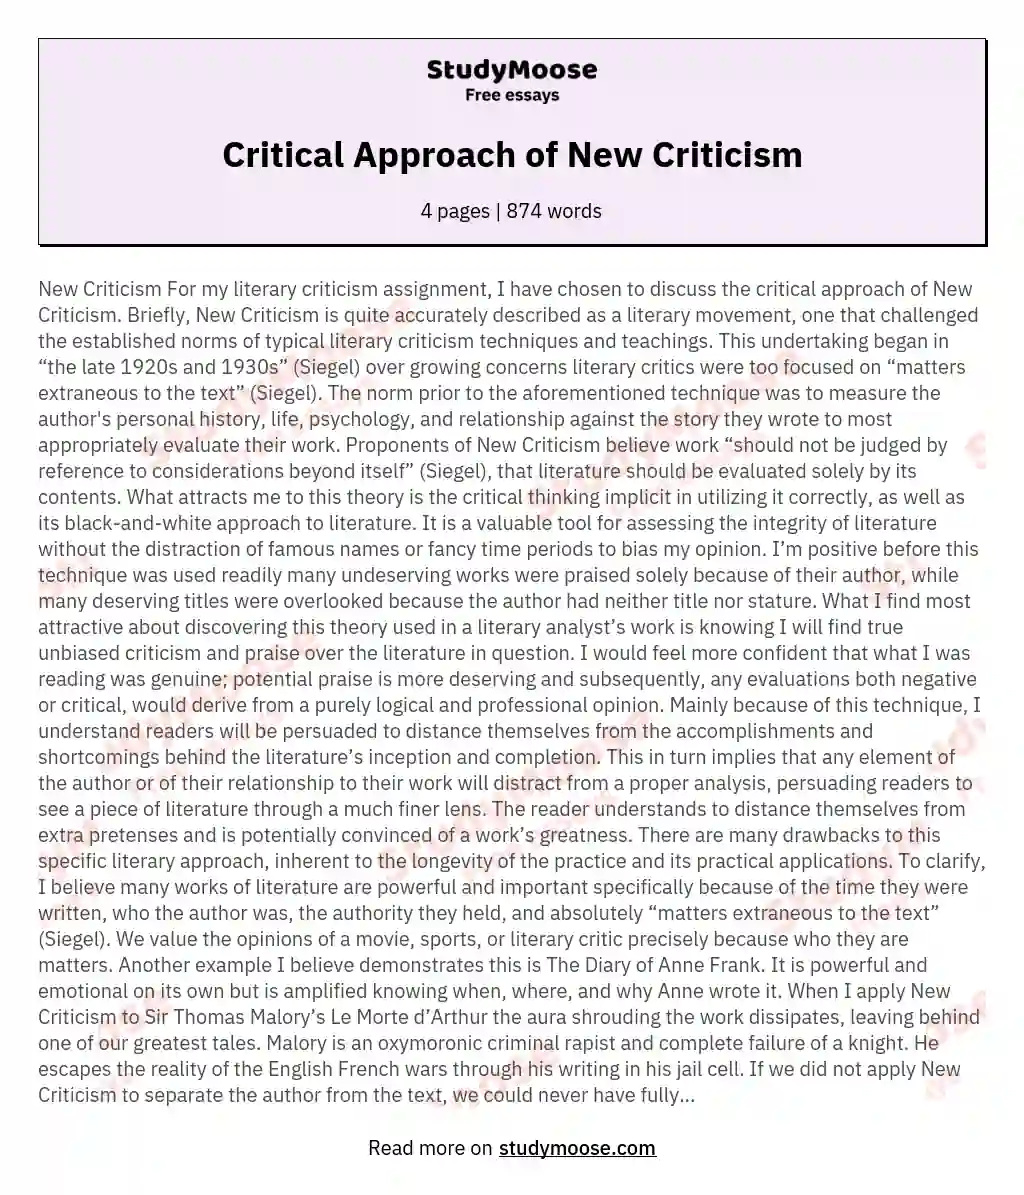 Critical Approach of New Criticism